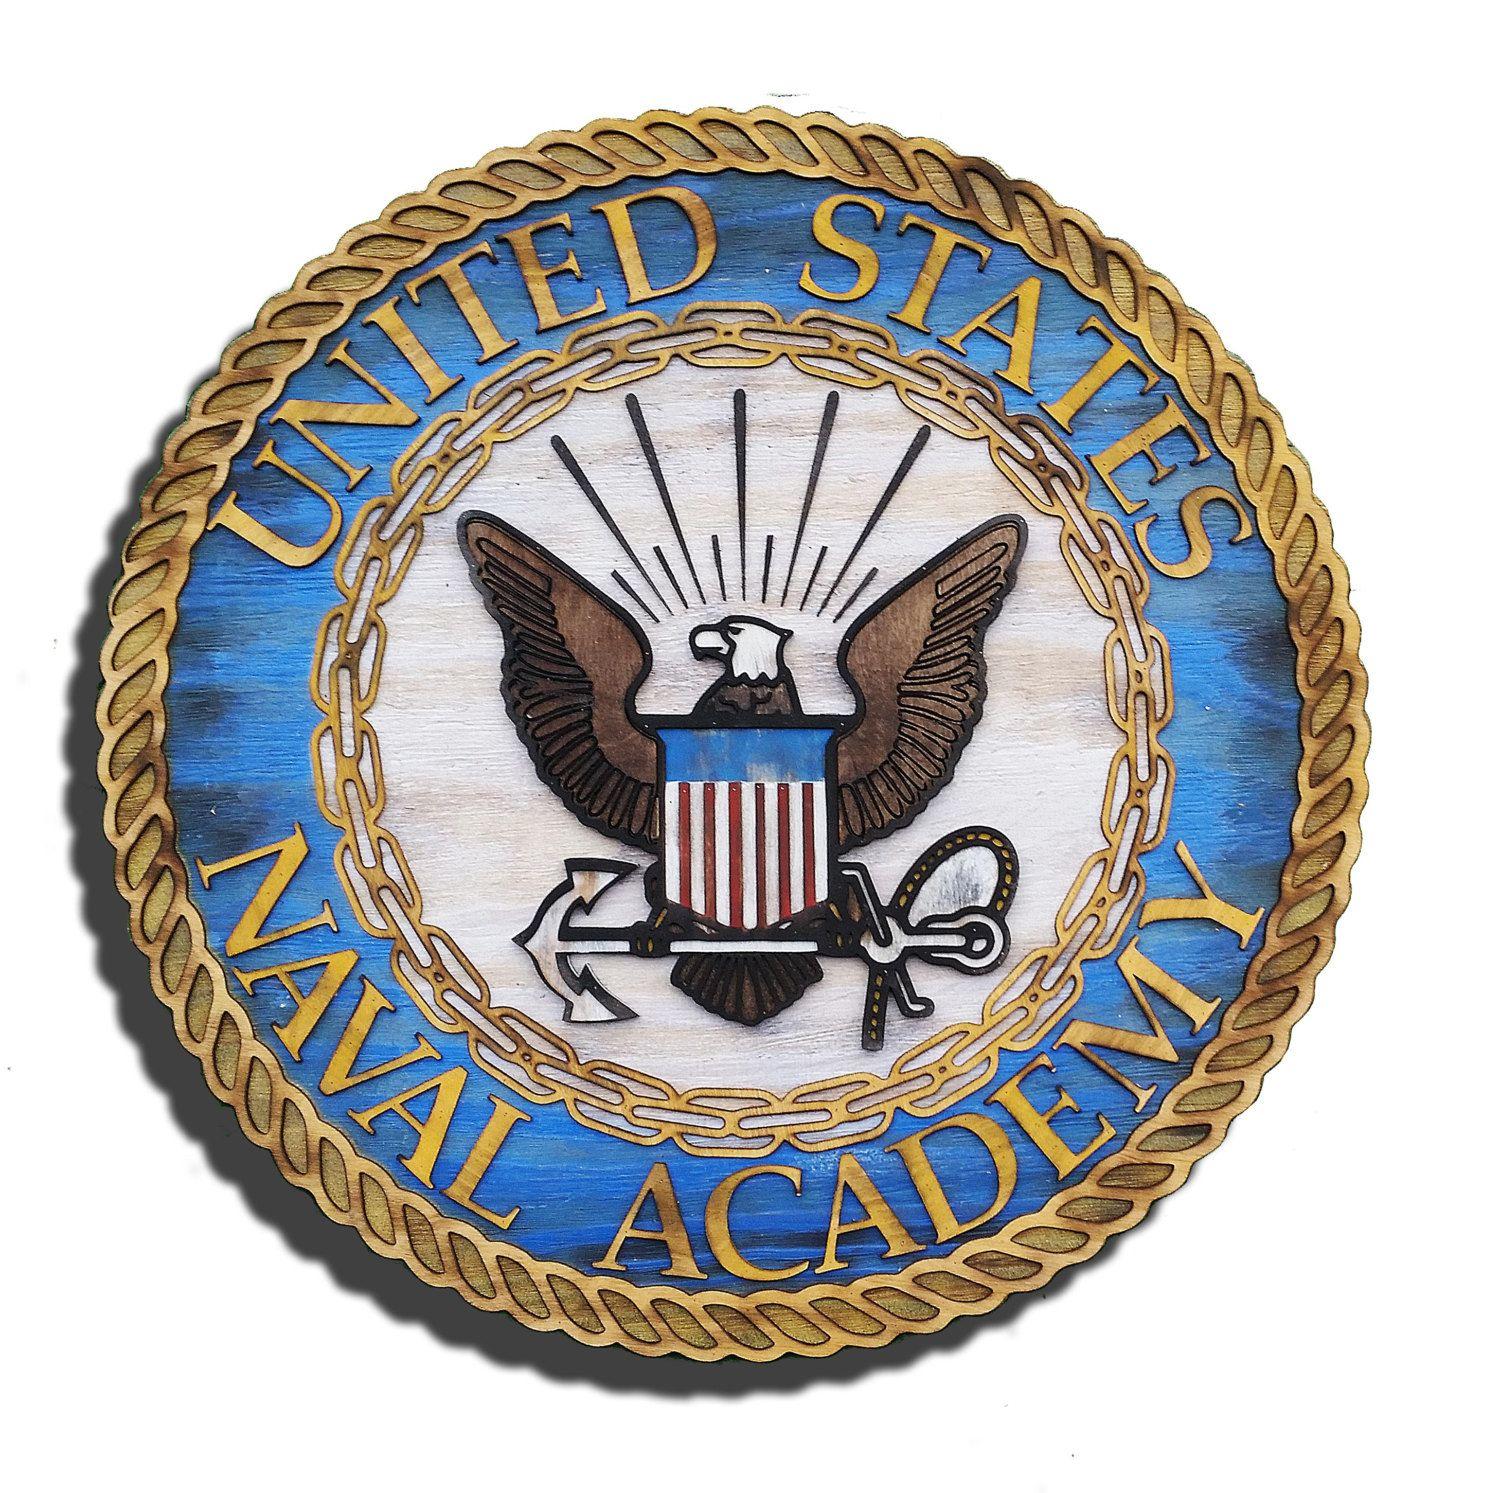 United States Naval Academy Logo - United States Naval Academy with 3D from reclaimed wood, vintage